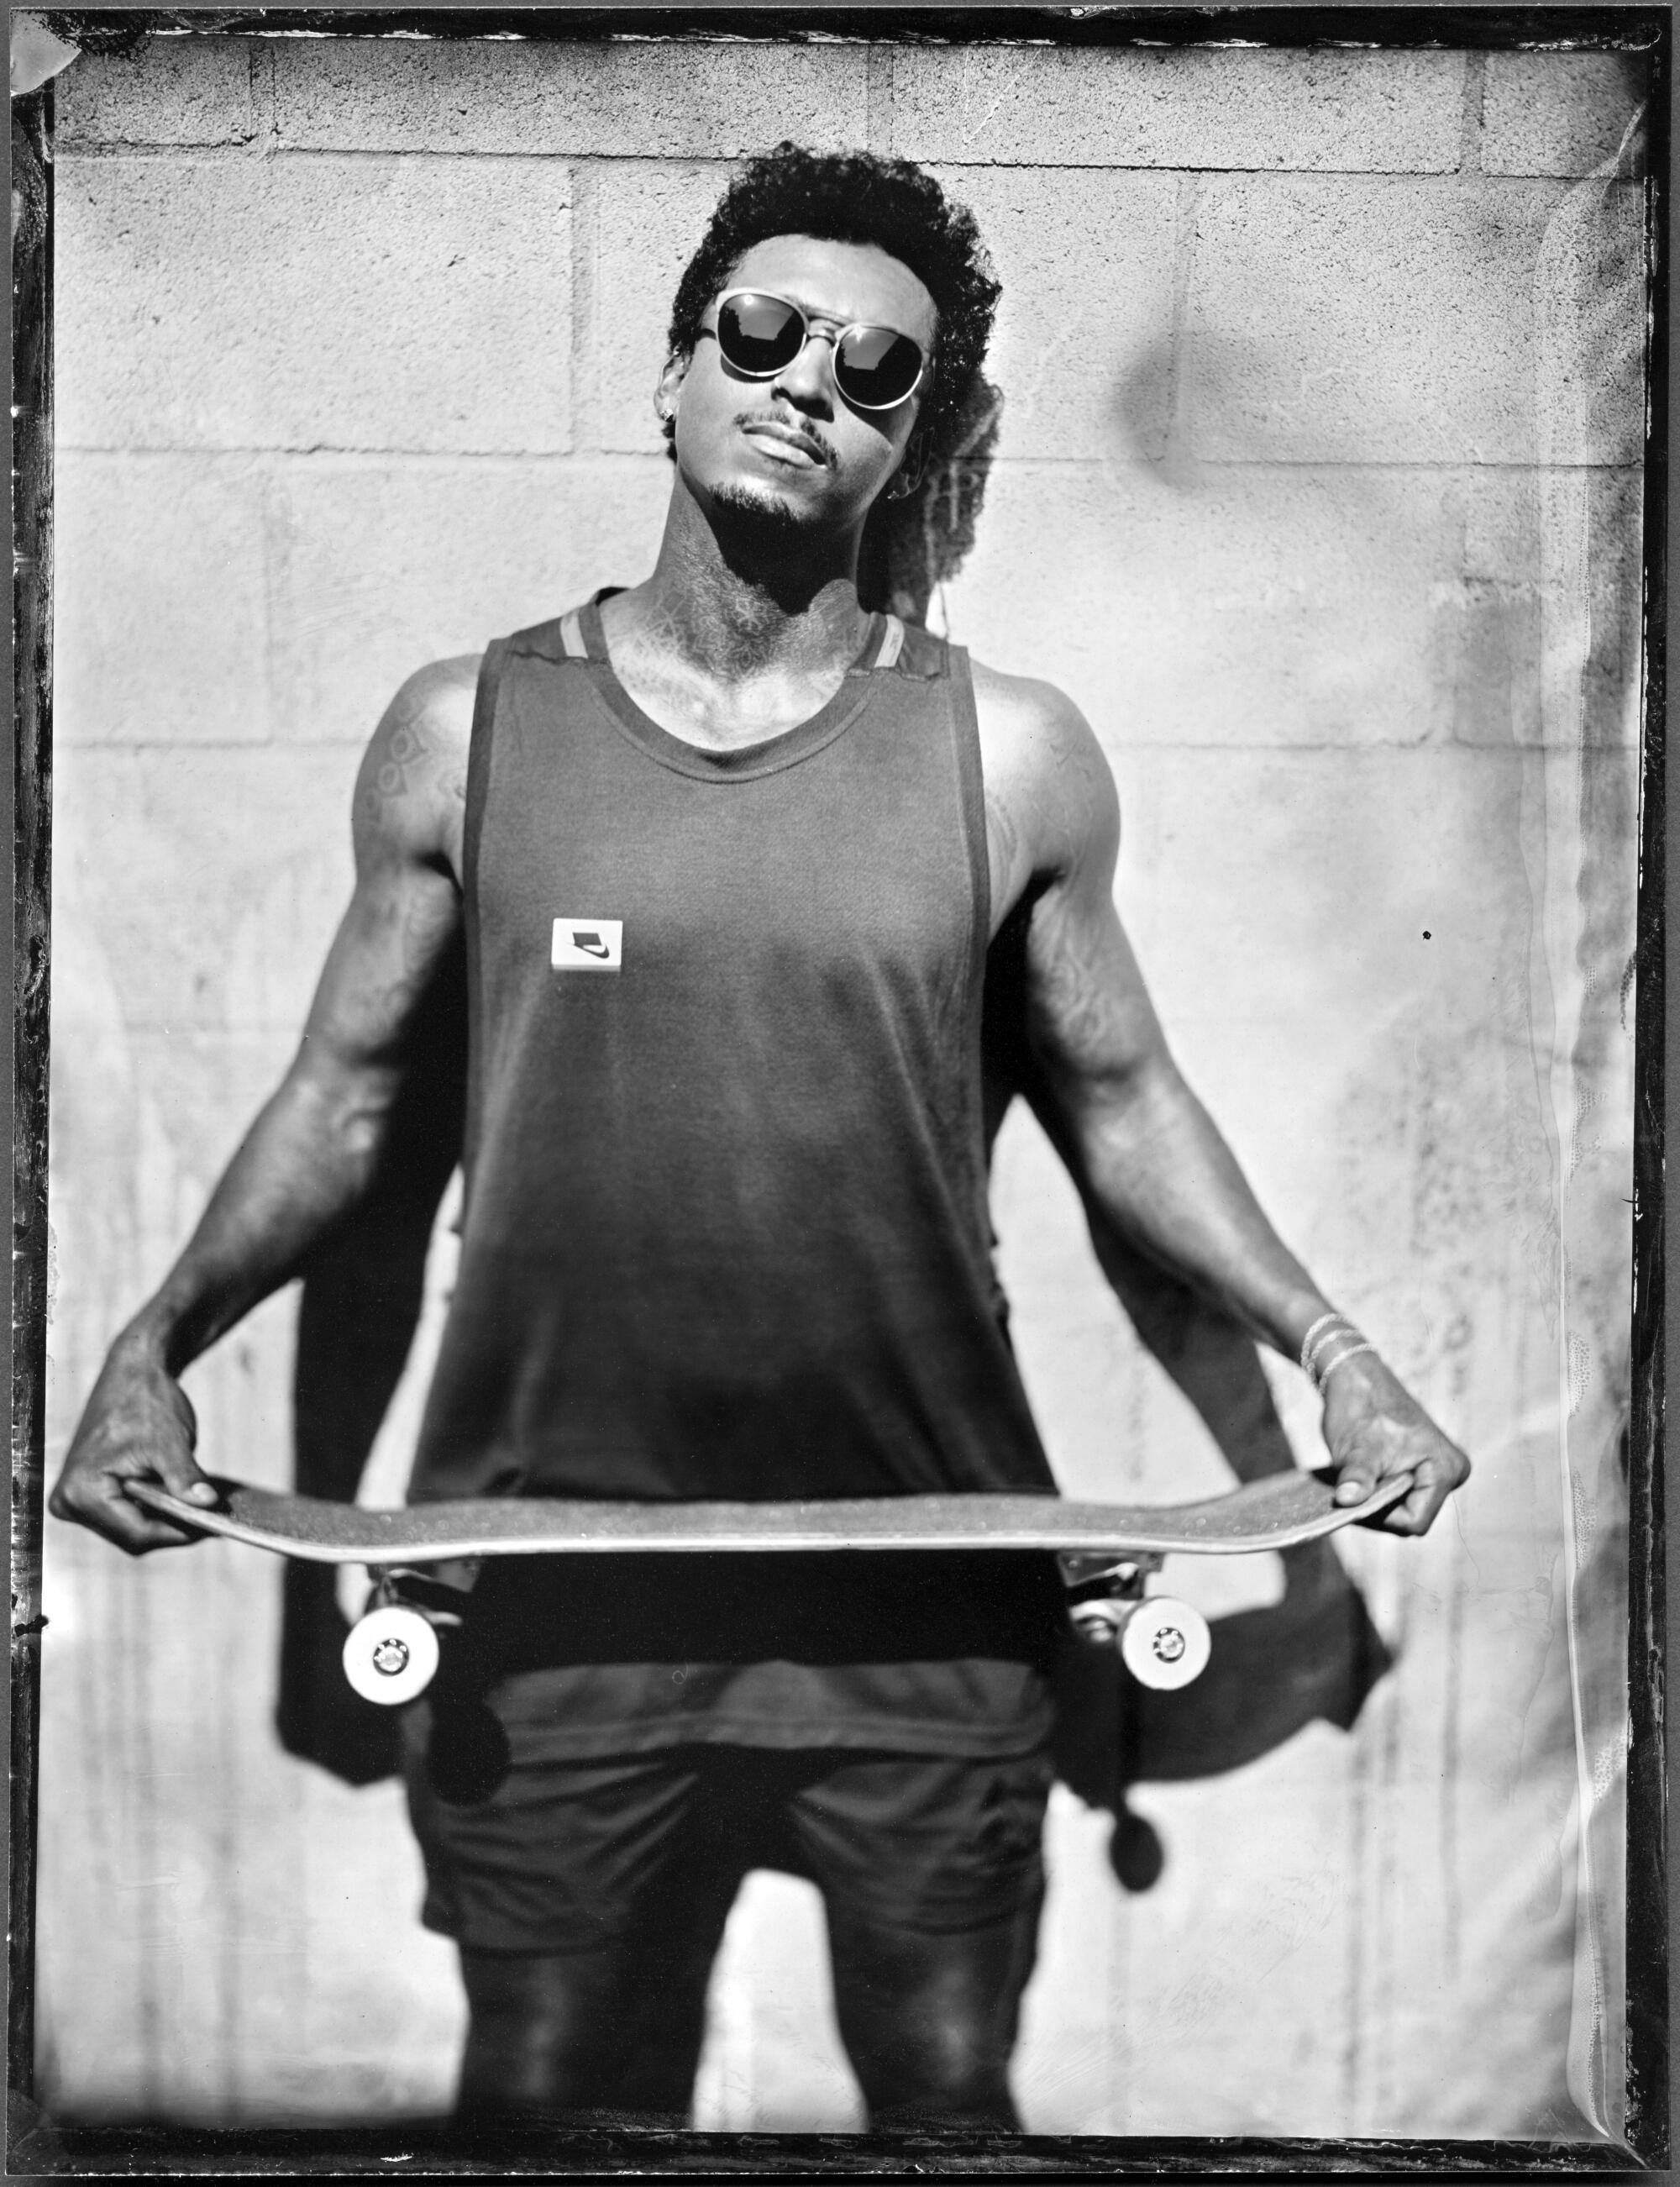 A man with sunglasses poses holding a skateboard